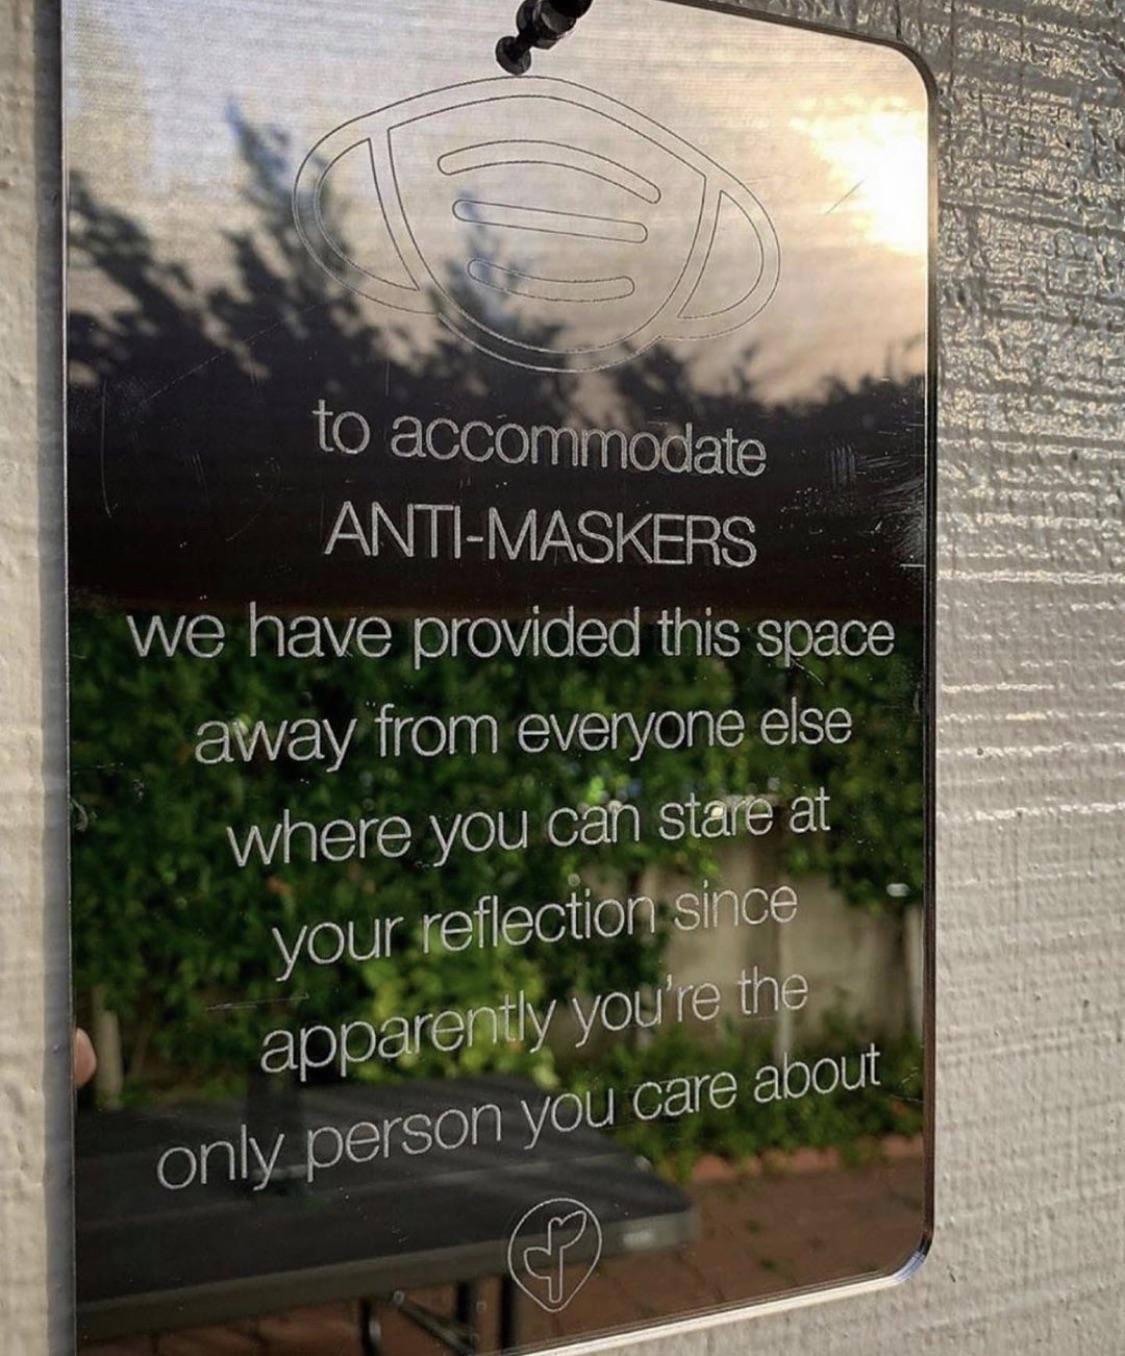 To accommodate anti-maskers we have provided this space away from everyone else where you can stare at your reflection since apparently you're the only person you care about sign